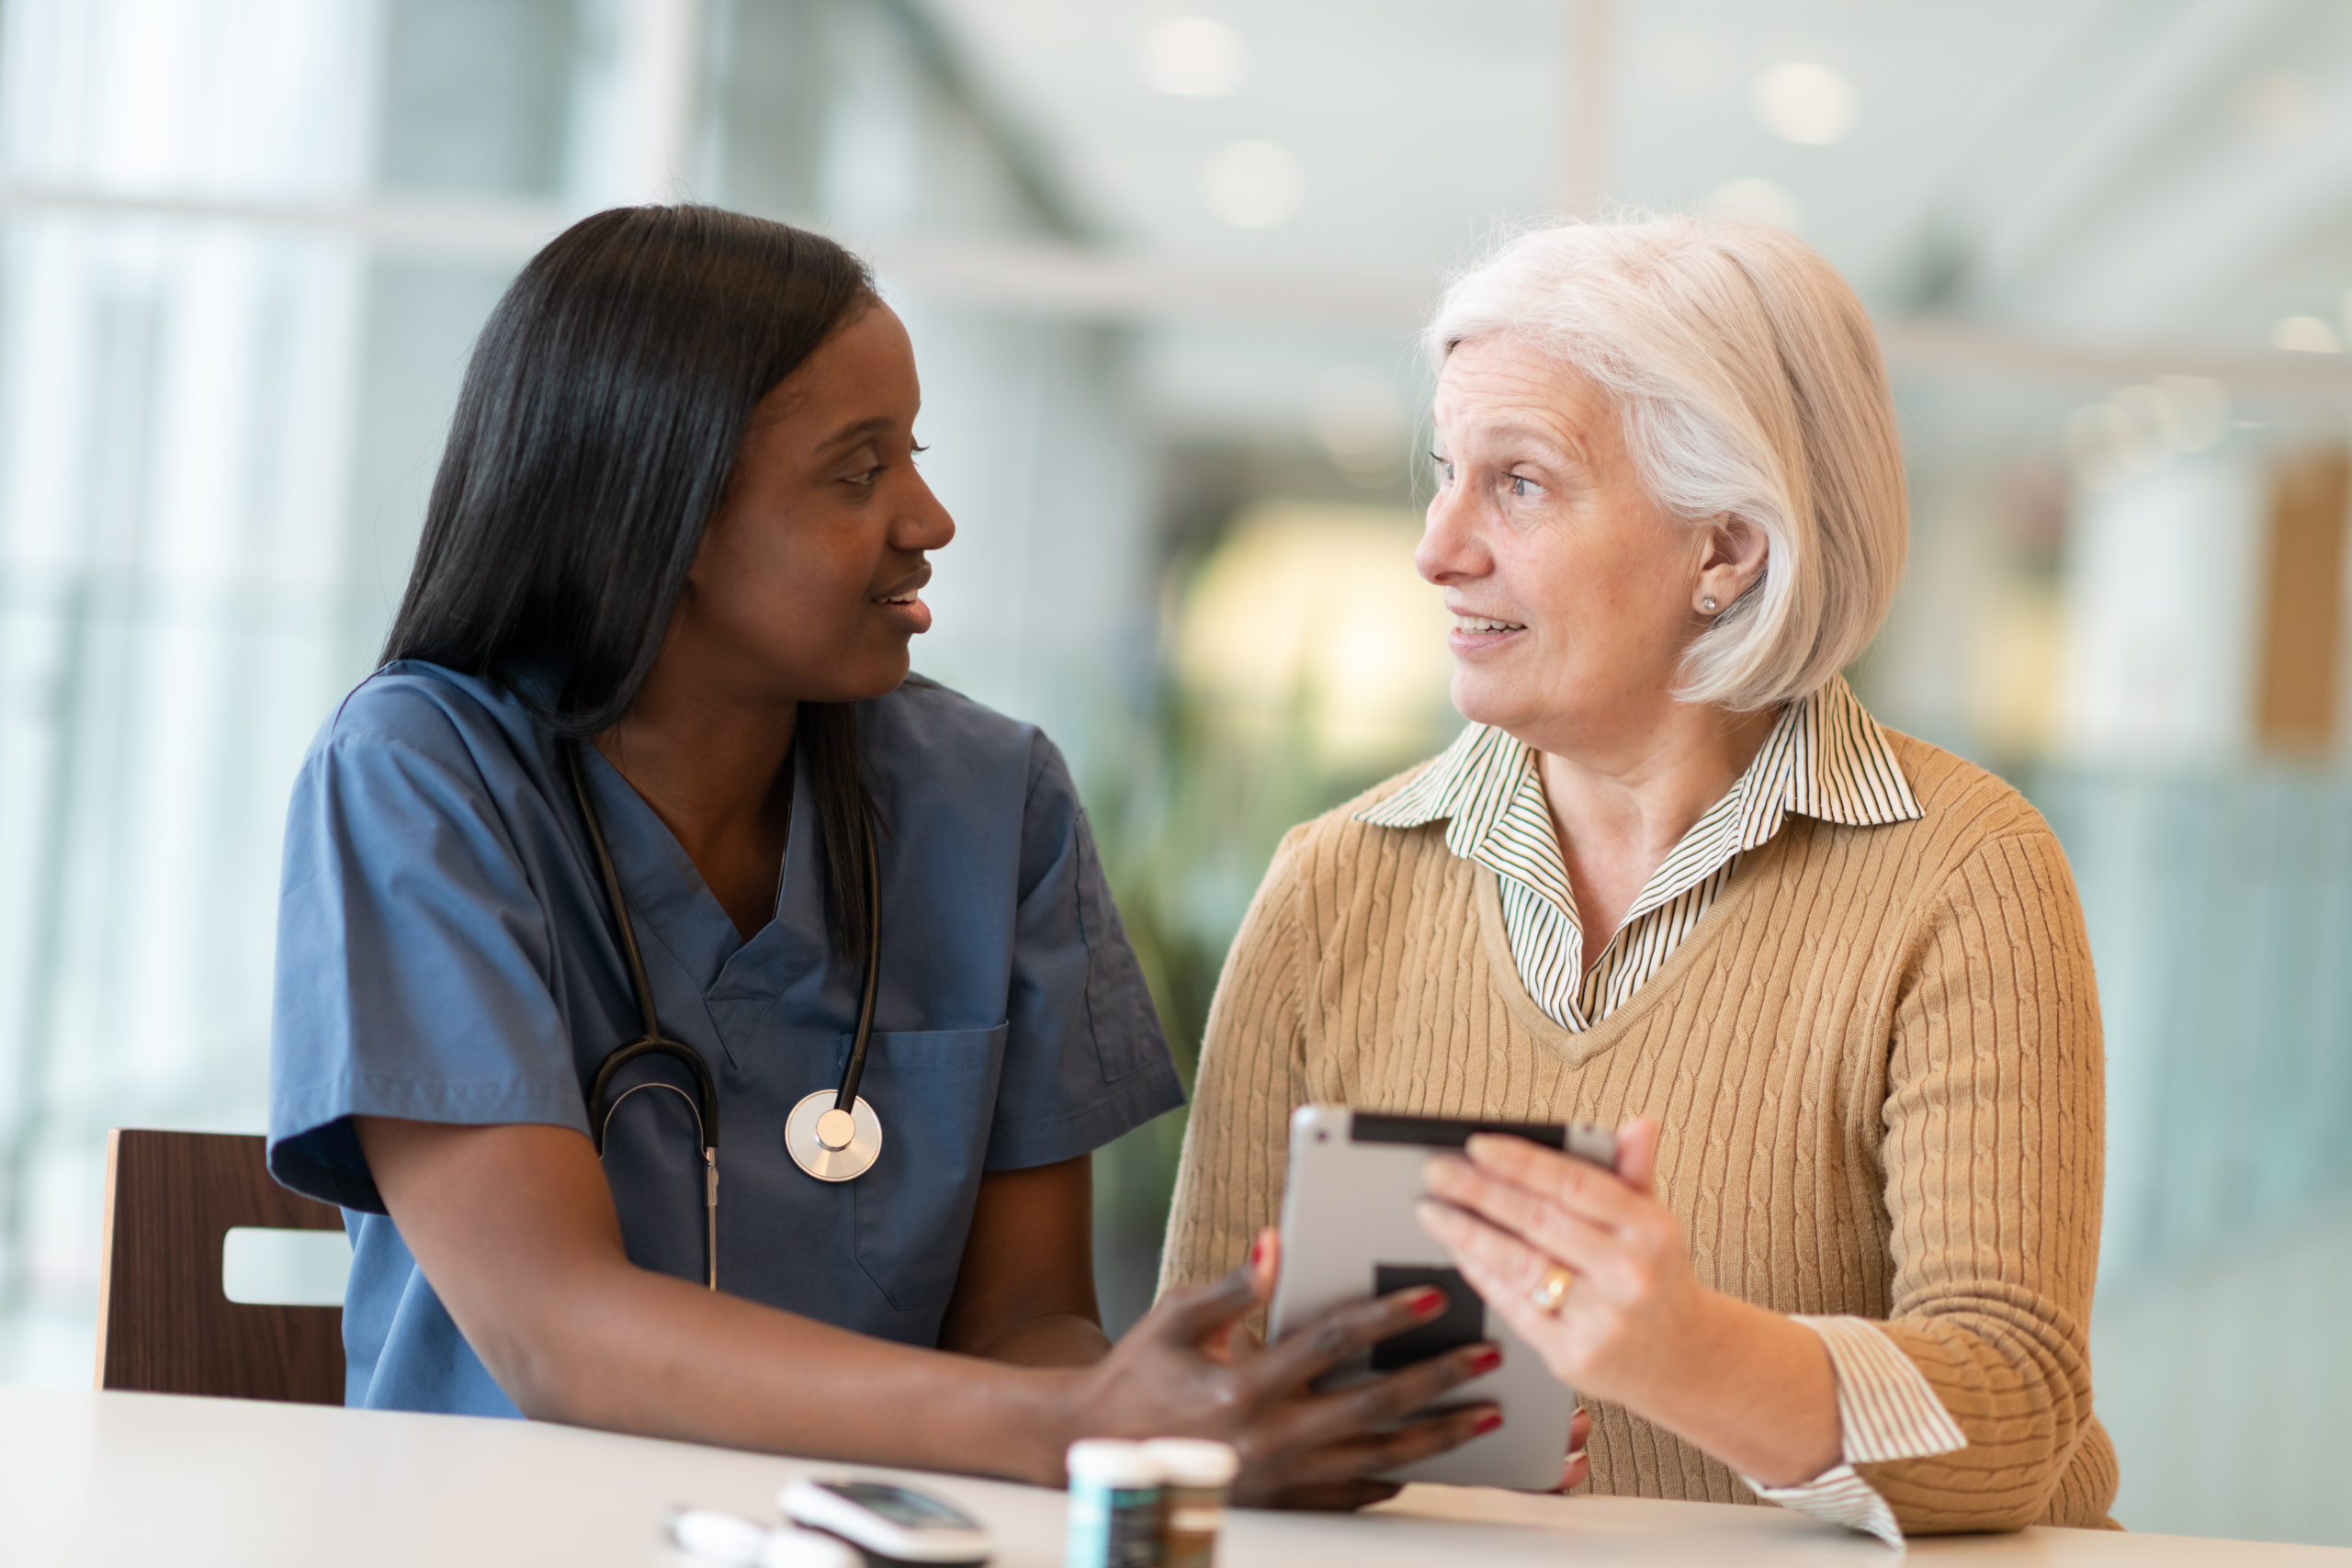 Keeping patients motivated to engage in their care